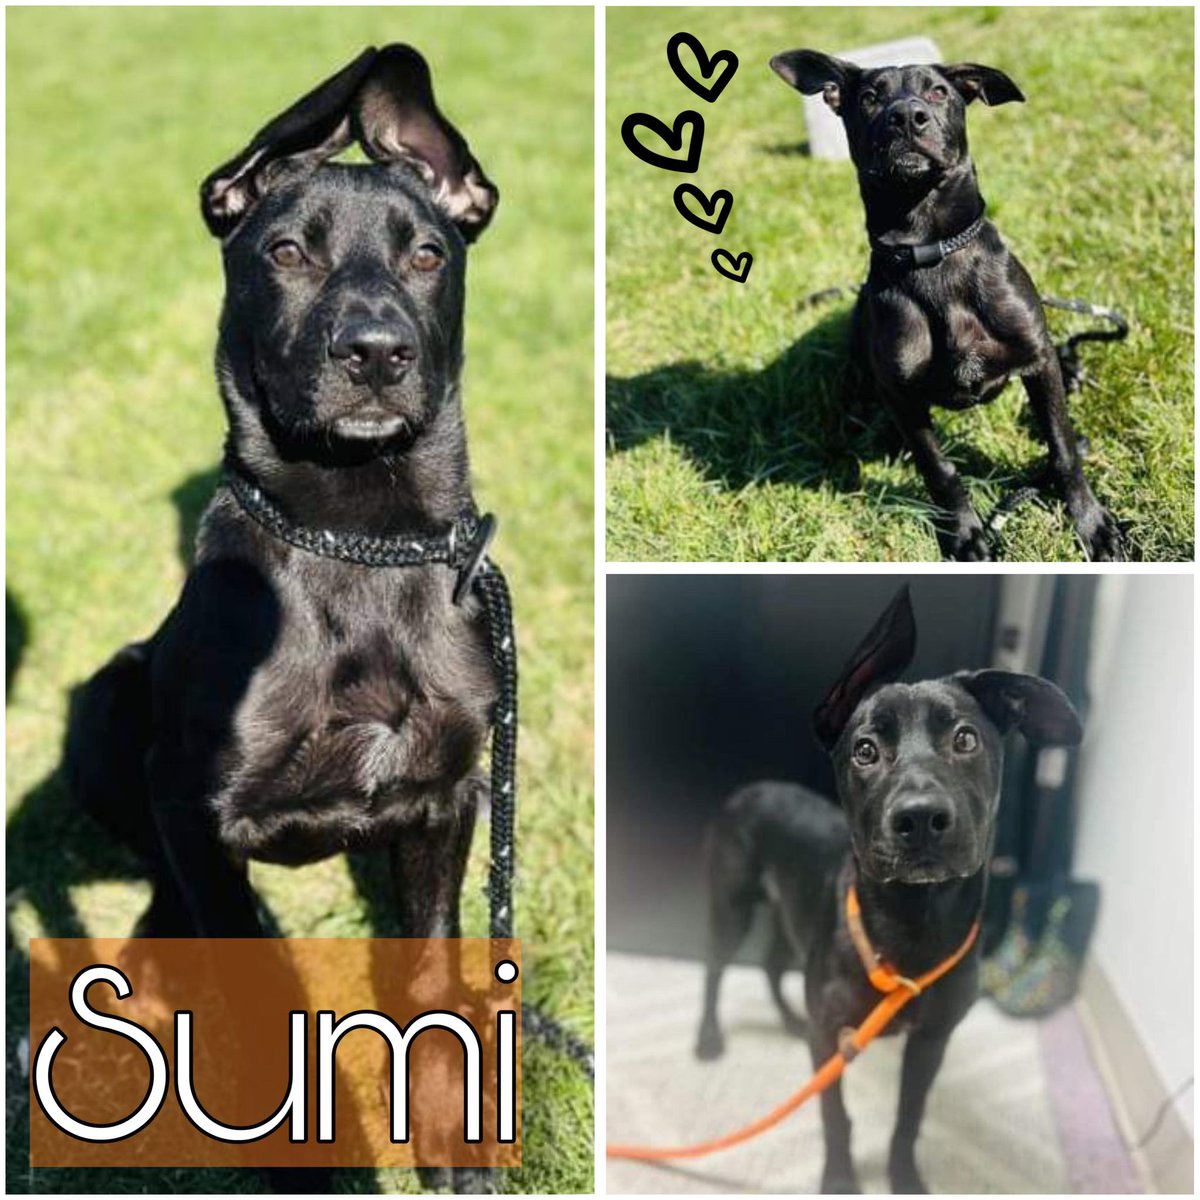 Sumi is our #PetOfTheWeek! She is full of energy and has a sweet disposition. She loves her stuffed animals, and gets along well with kids and other dogs. Come meet this sweet girl at @HumaneHBG: bit.ly/4dg6kxf
#LoveHBG #Dogs